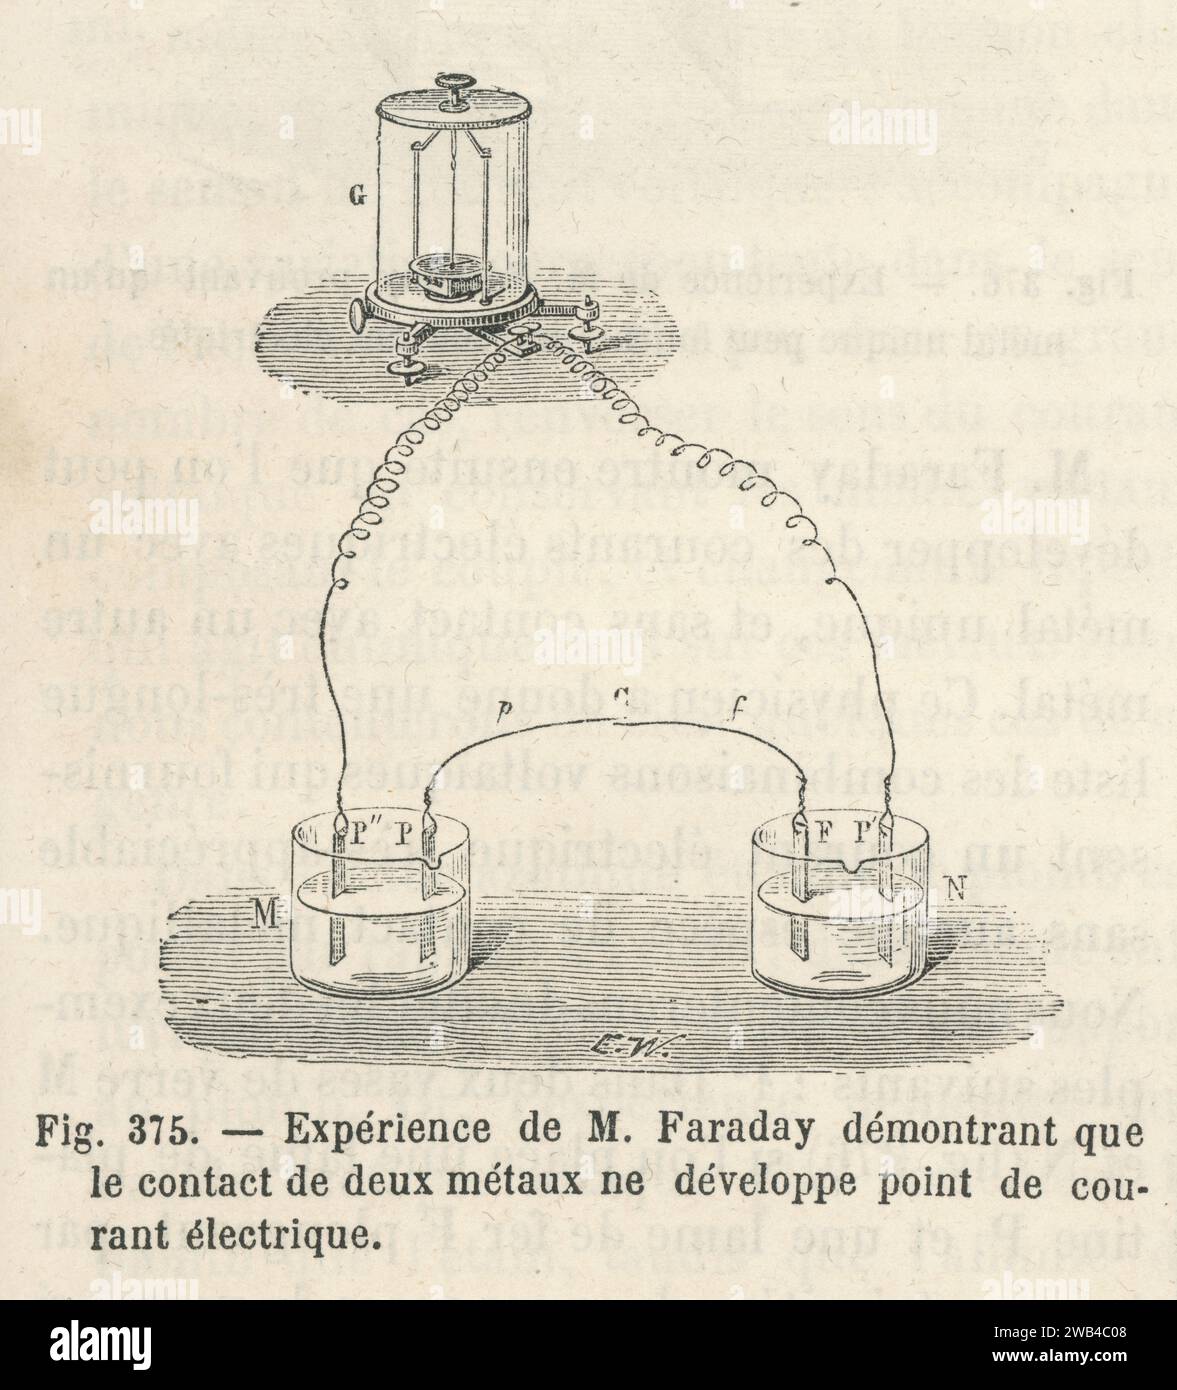 Faraday's experiment demonstrating that the electricity produced by a battery pile comes from the chemical action exerted by the acids on the metals of which they are composed, and not from contact between the metals themselves. First half of the 19th century.  Illustration from 'Les Merveilles de la science ou description populaire des inventions modernes' written by Louis Figuier and published in 1867 by Furne, Jouvet et Cie. Stock Photo